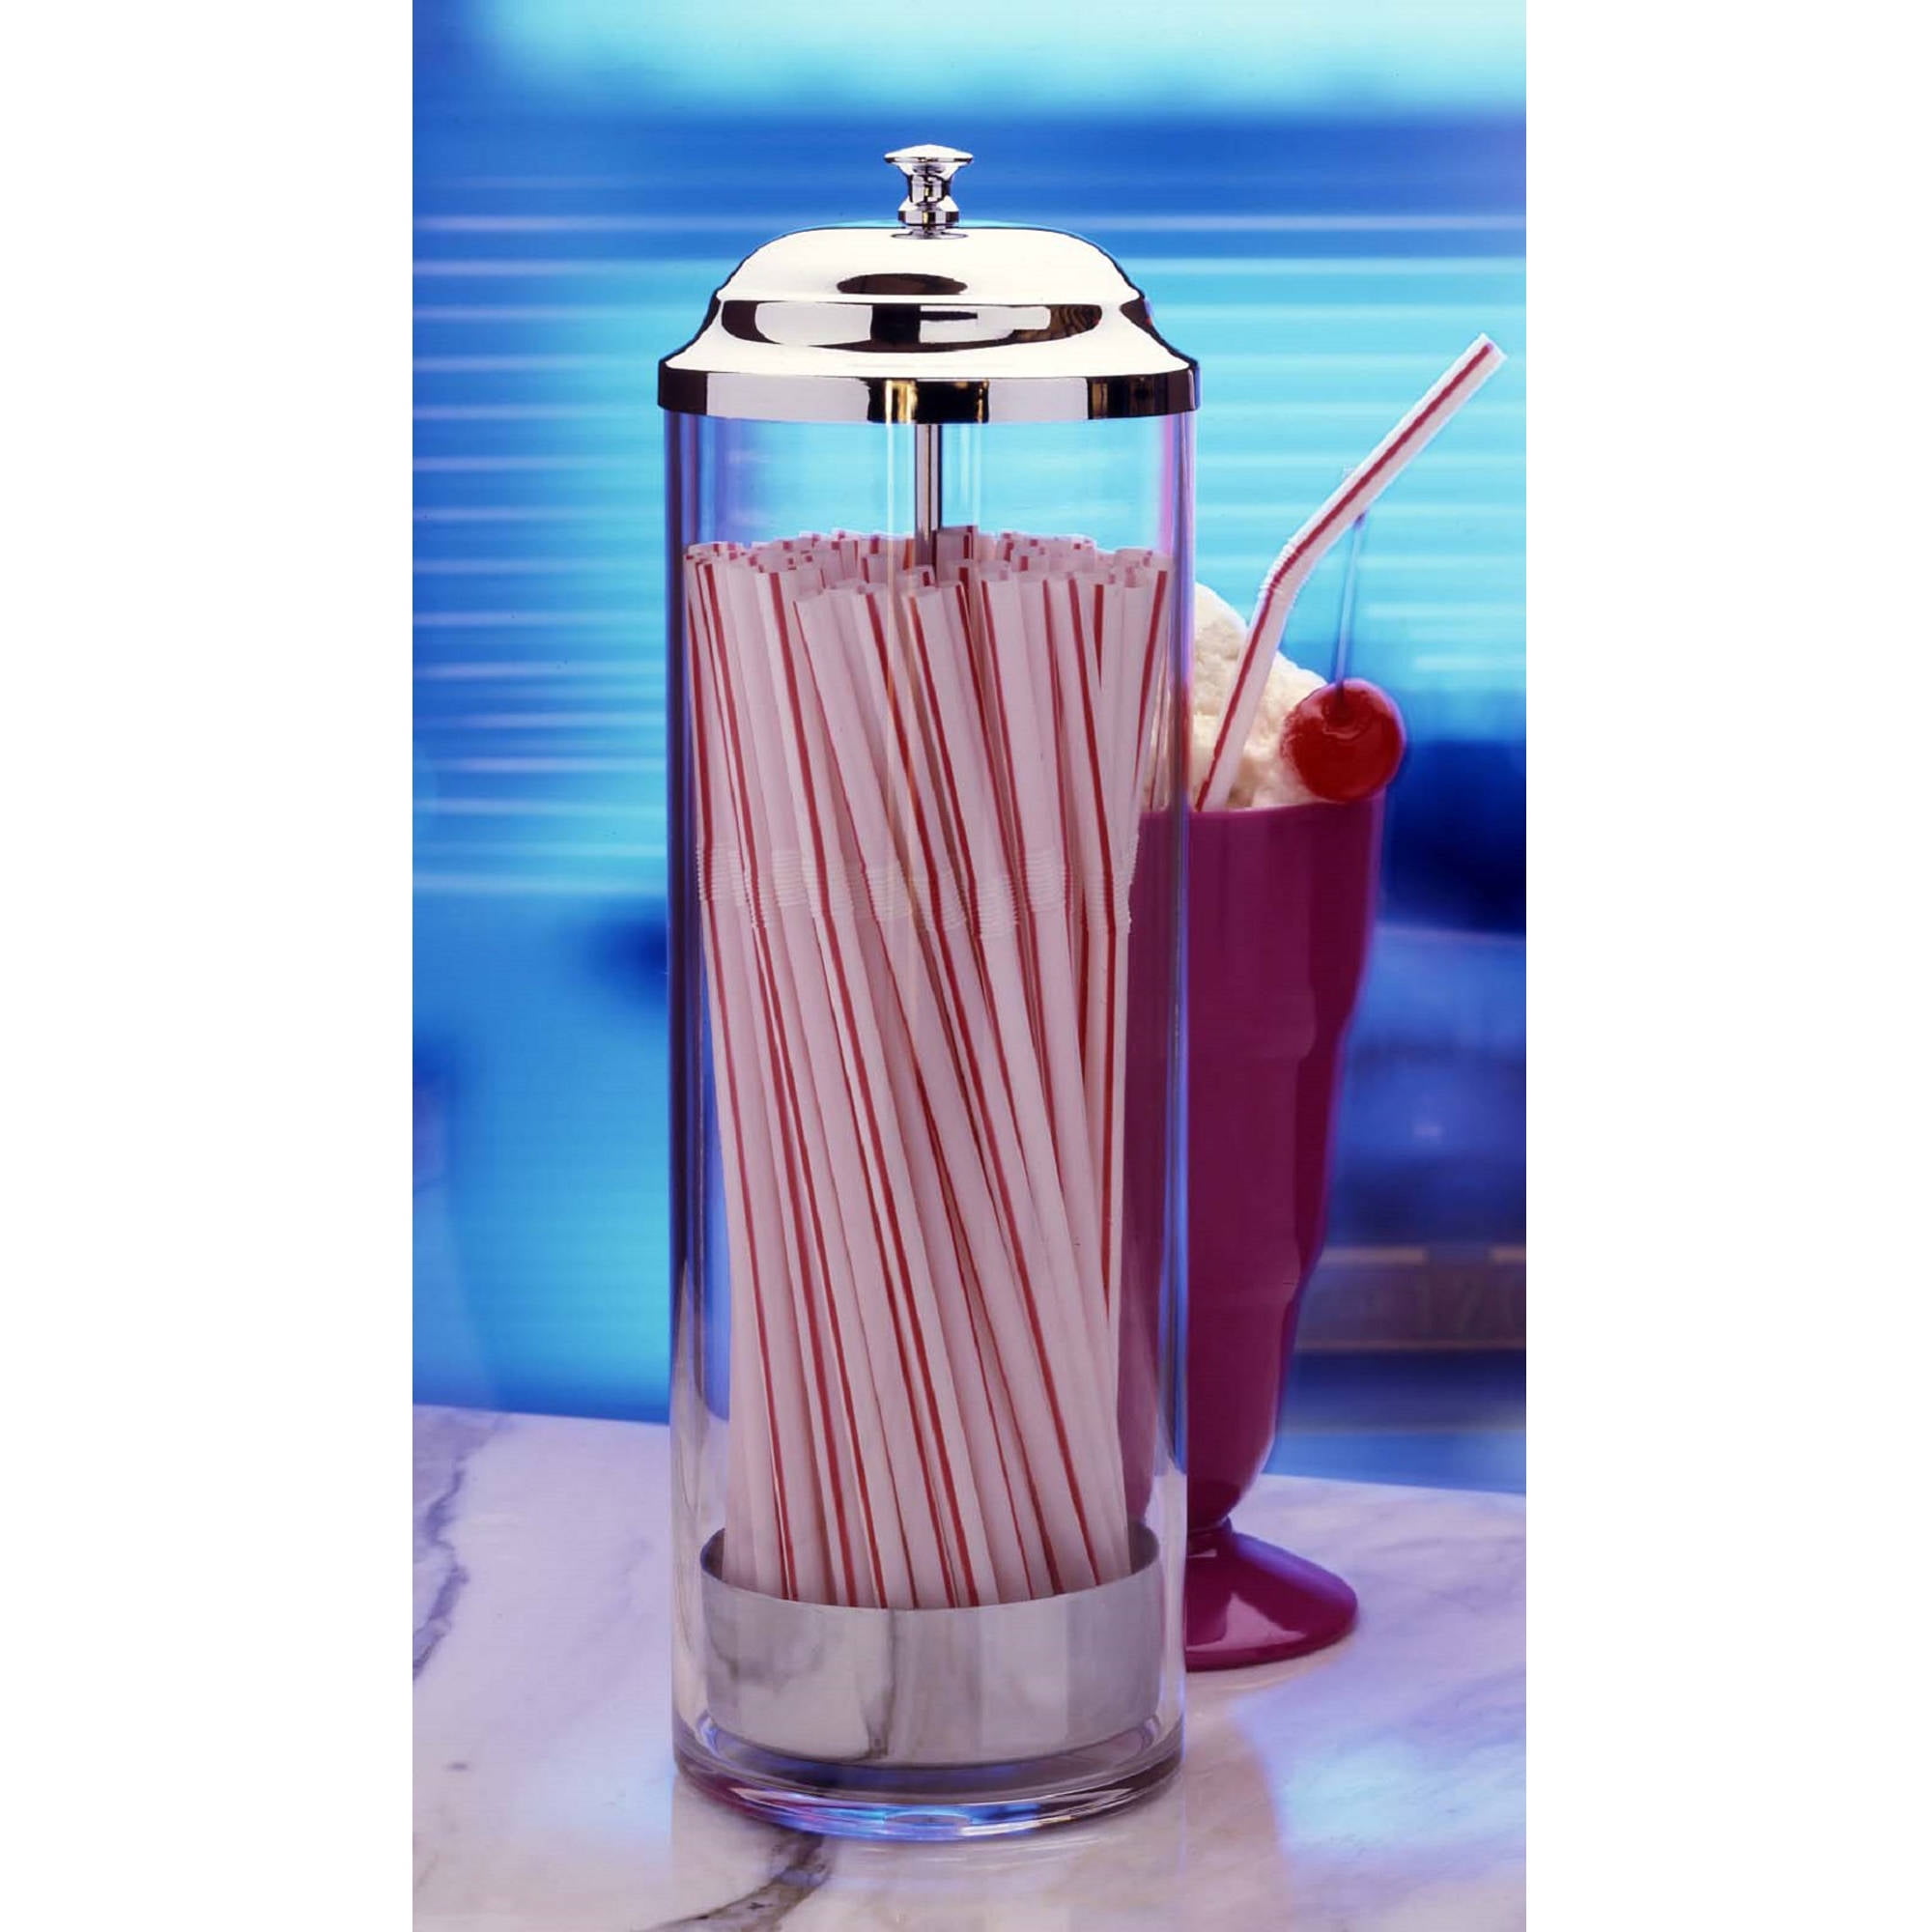 Choice Acrylic Straw Dispenser for Unwrapped Standard Sized Straws Up to  10 Long, 0.25 Diameter